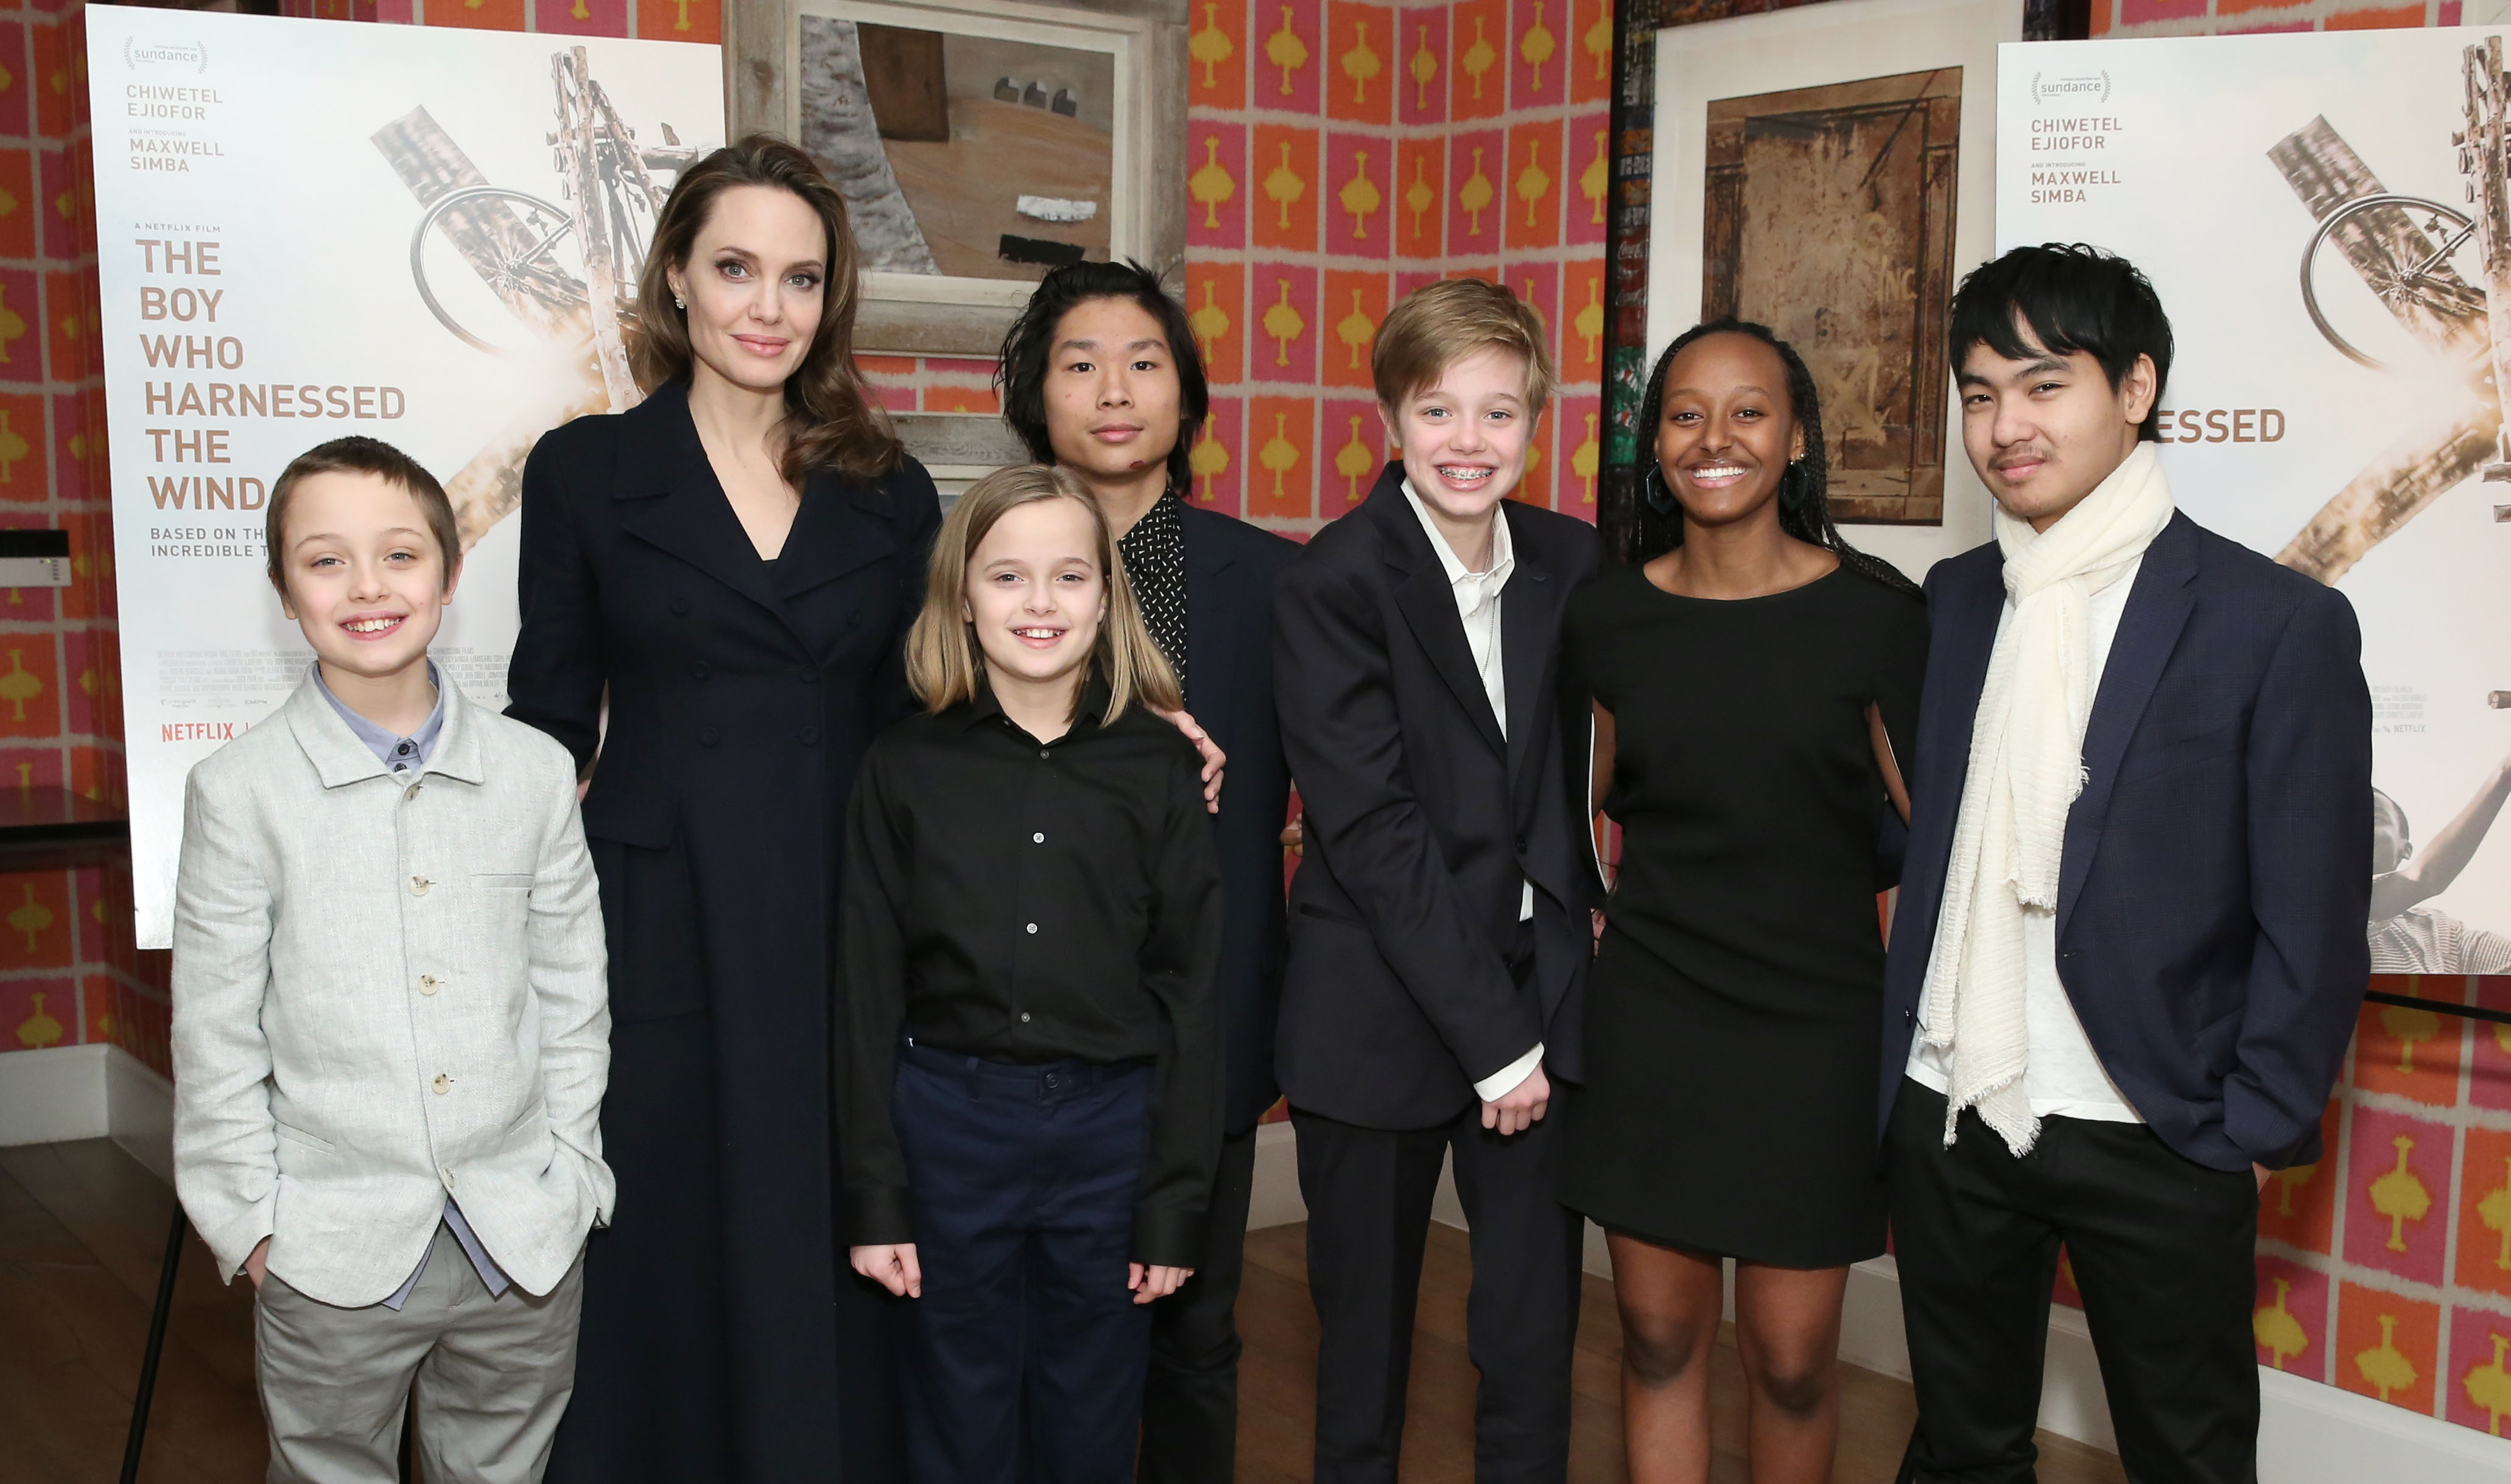 Angelina Jolie with her children Knox, Vivienne, Pax, Shiloh, Zahara and Maddox at "The Boy Who Harnessed The Wind" screening in New York in 2019 | Source: Getty Images